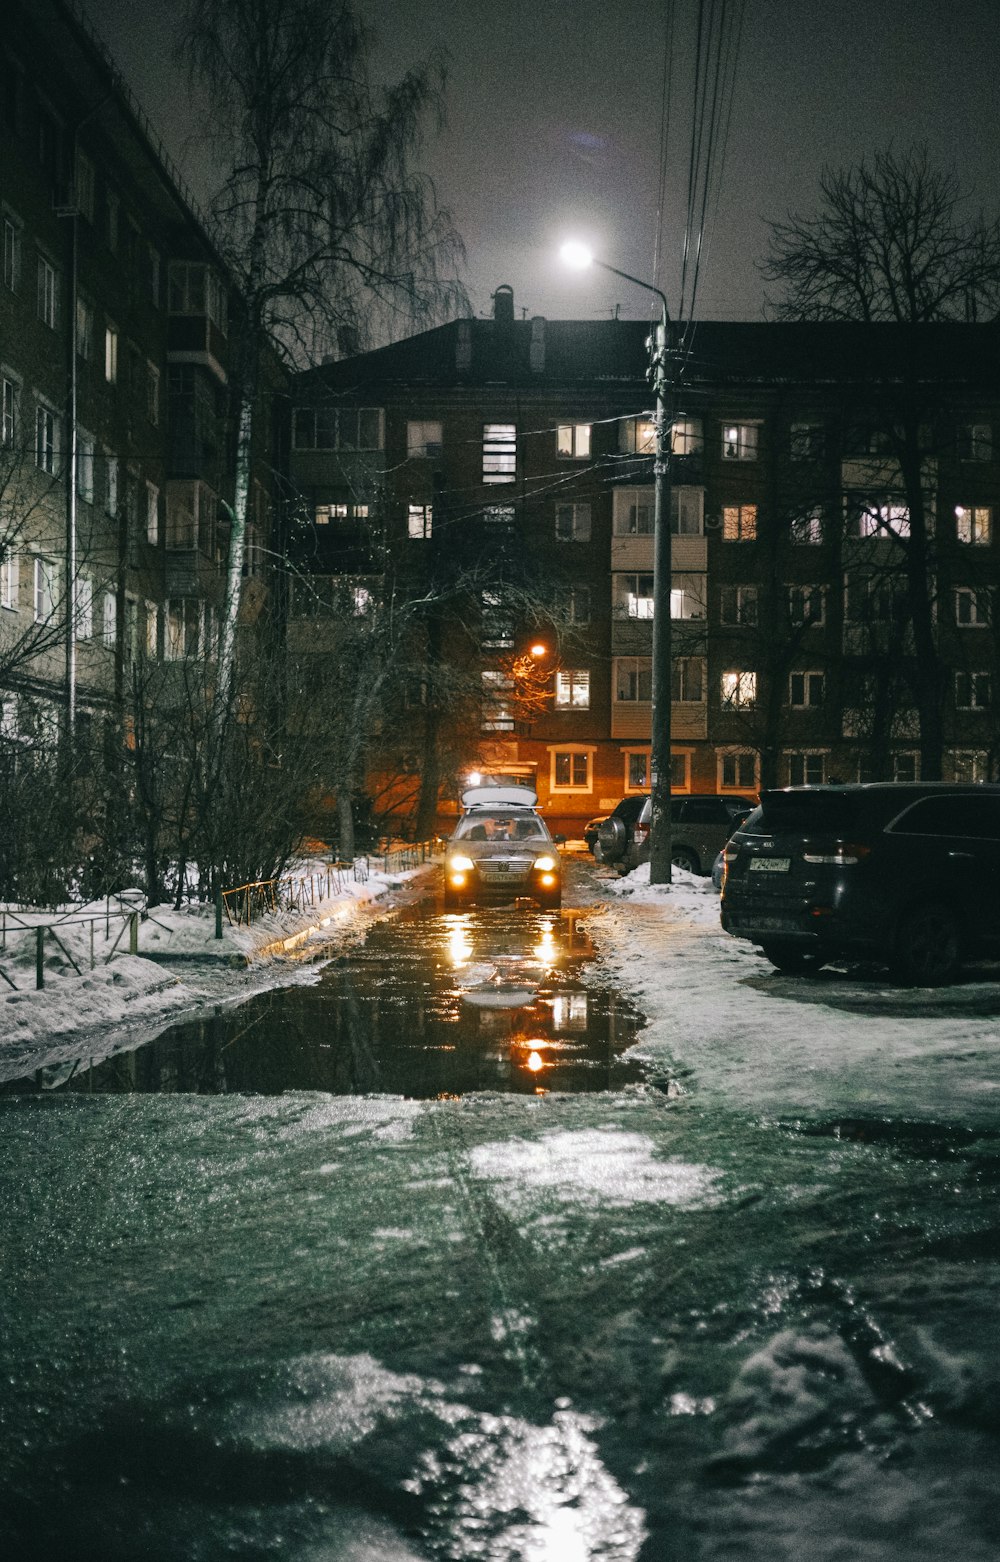 cars parked on the side of the road during winter